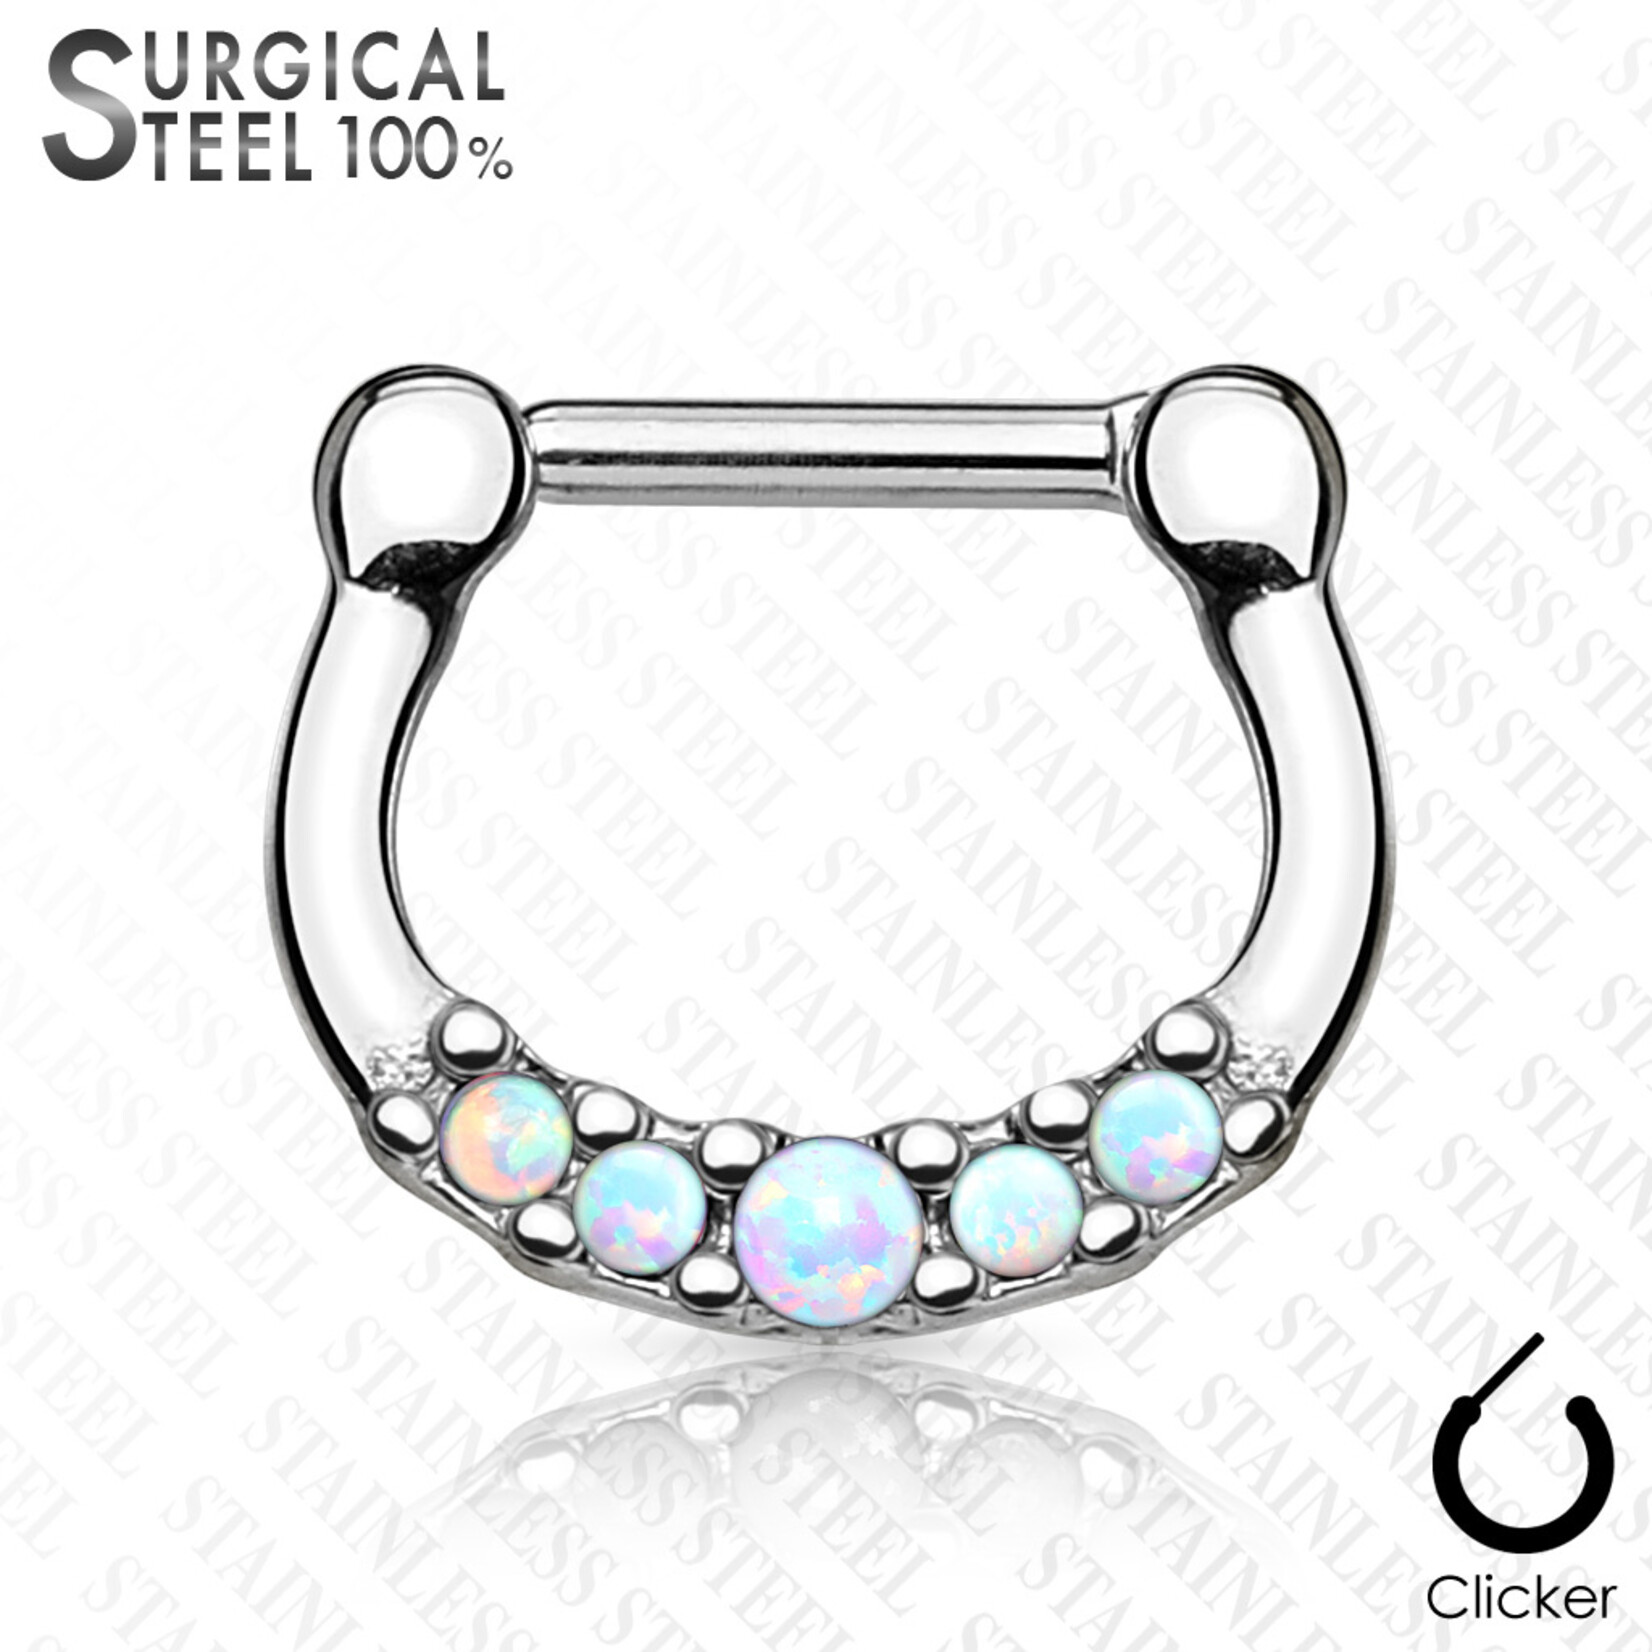 Hollywood Body Jewelry 5 Opals Clicker